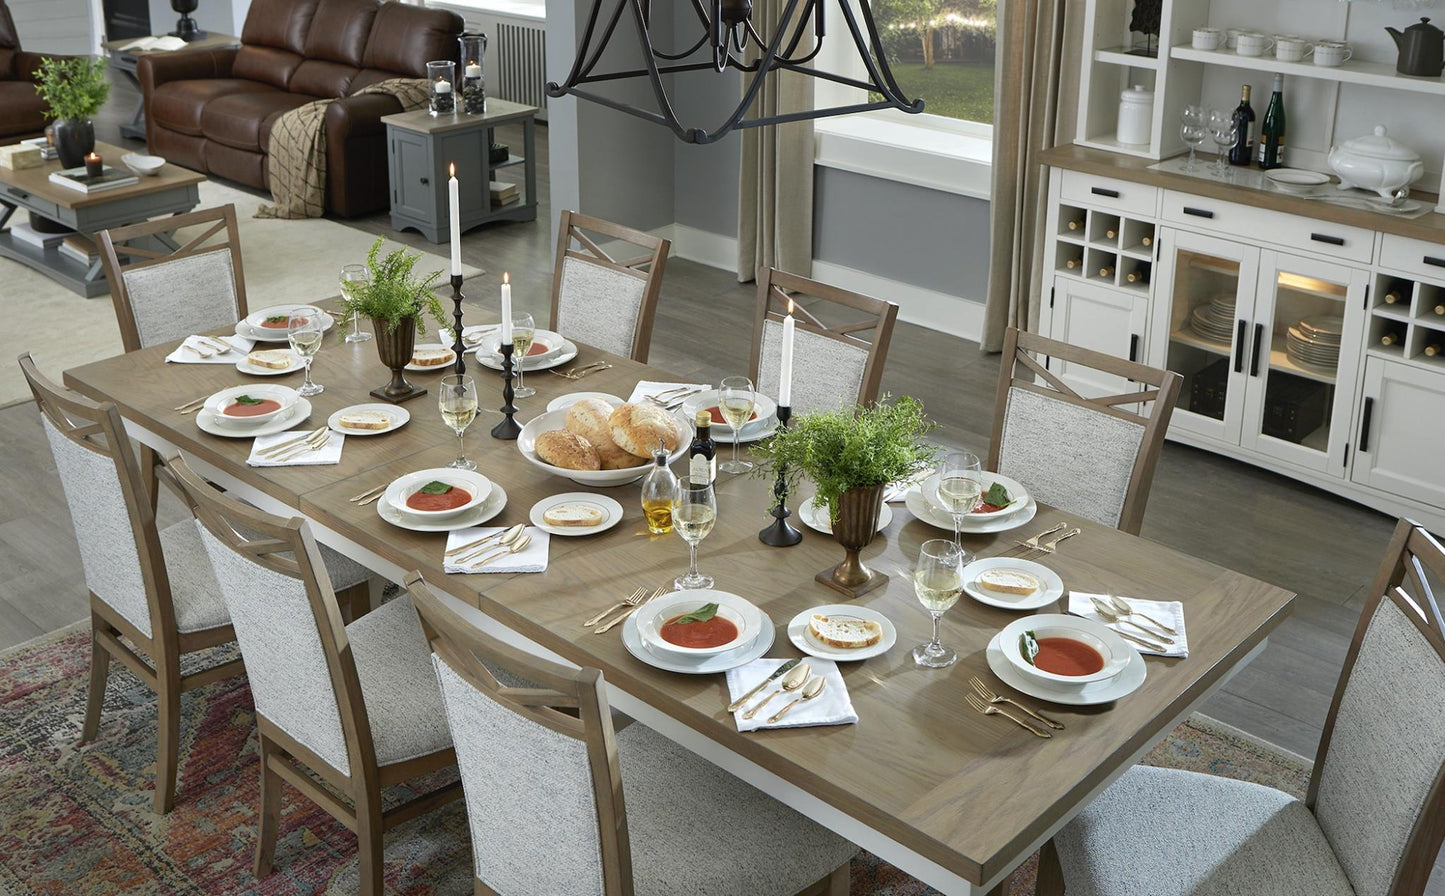 Americana Modern Dining Collection by Parker House